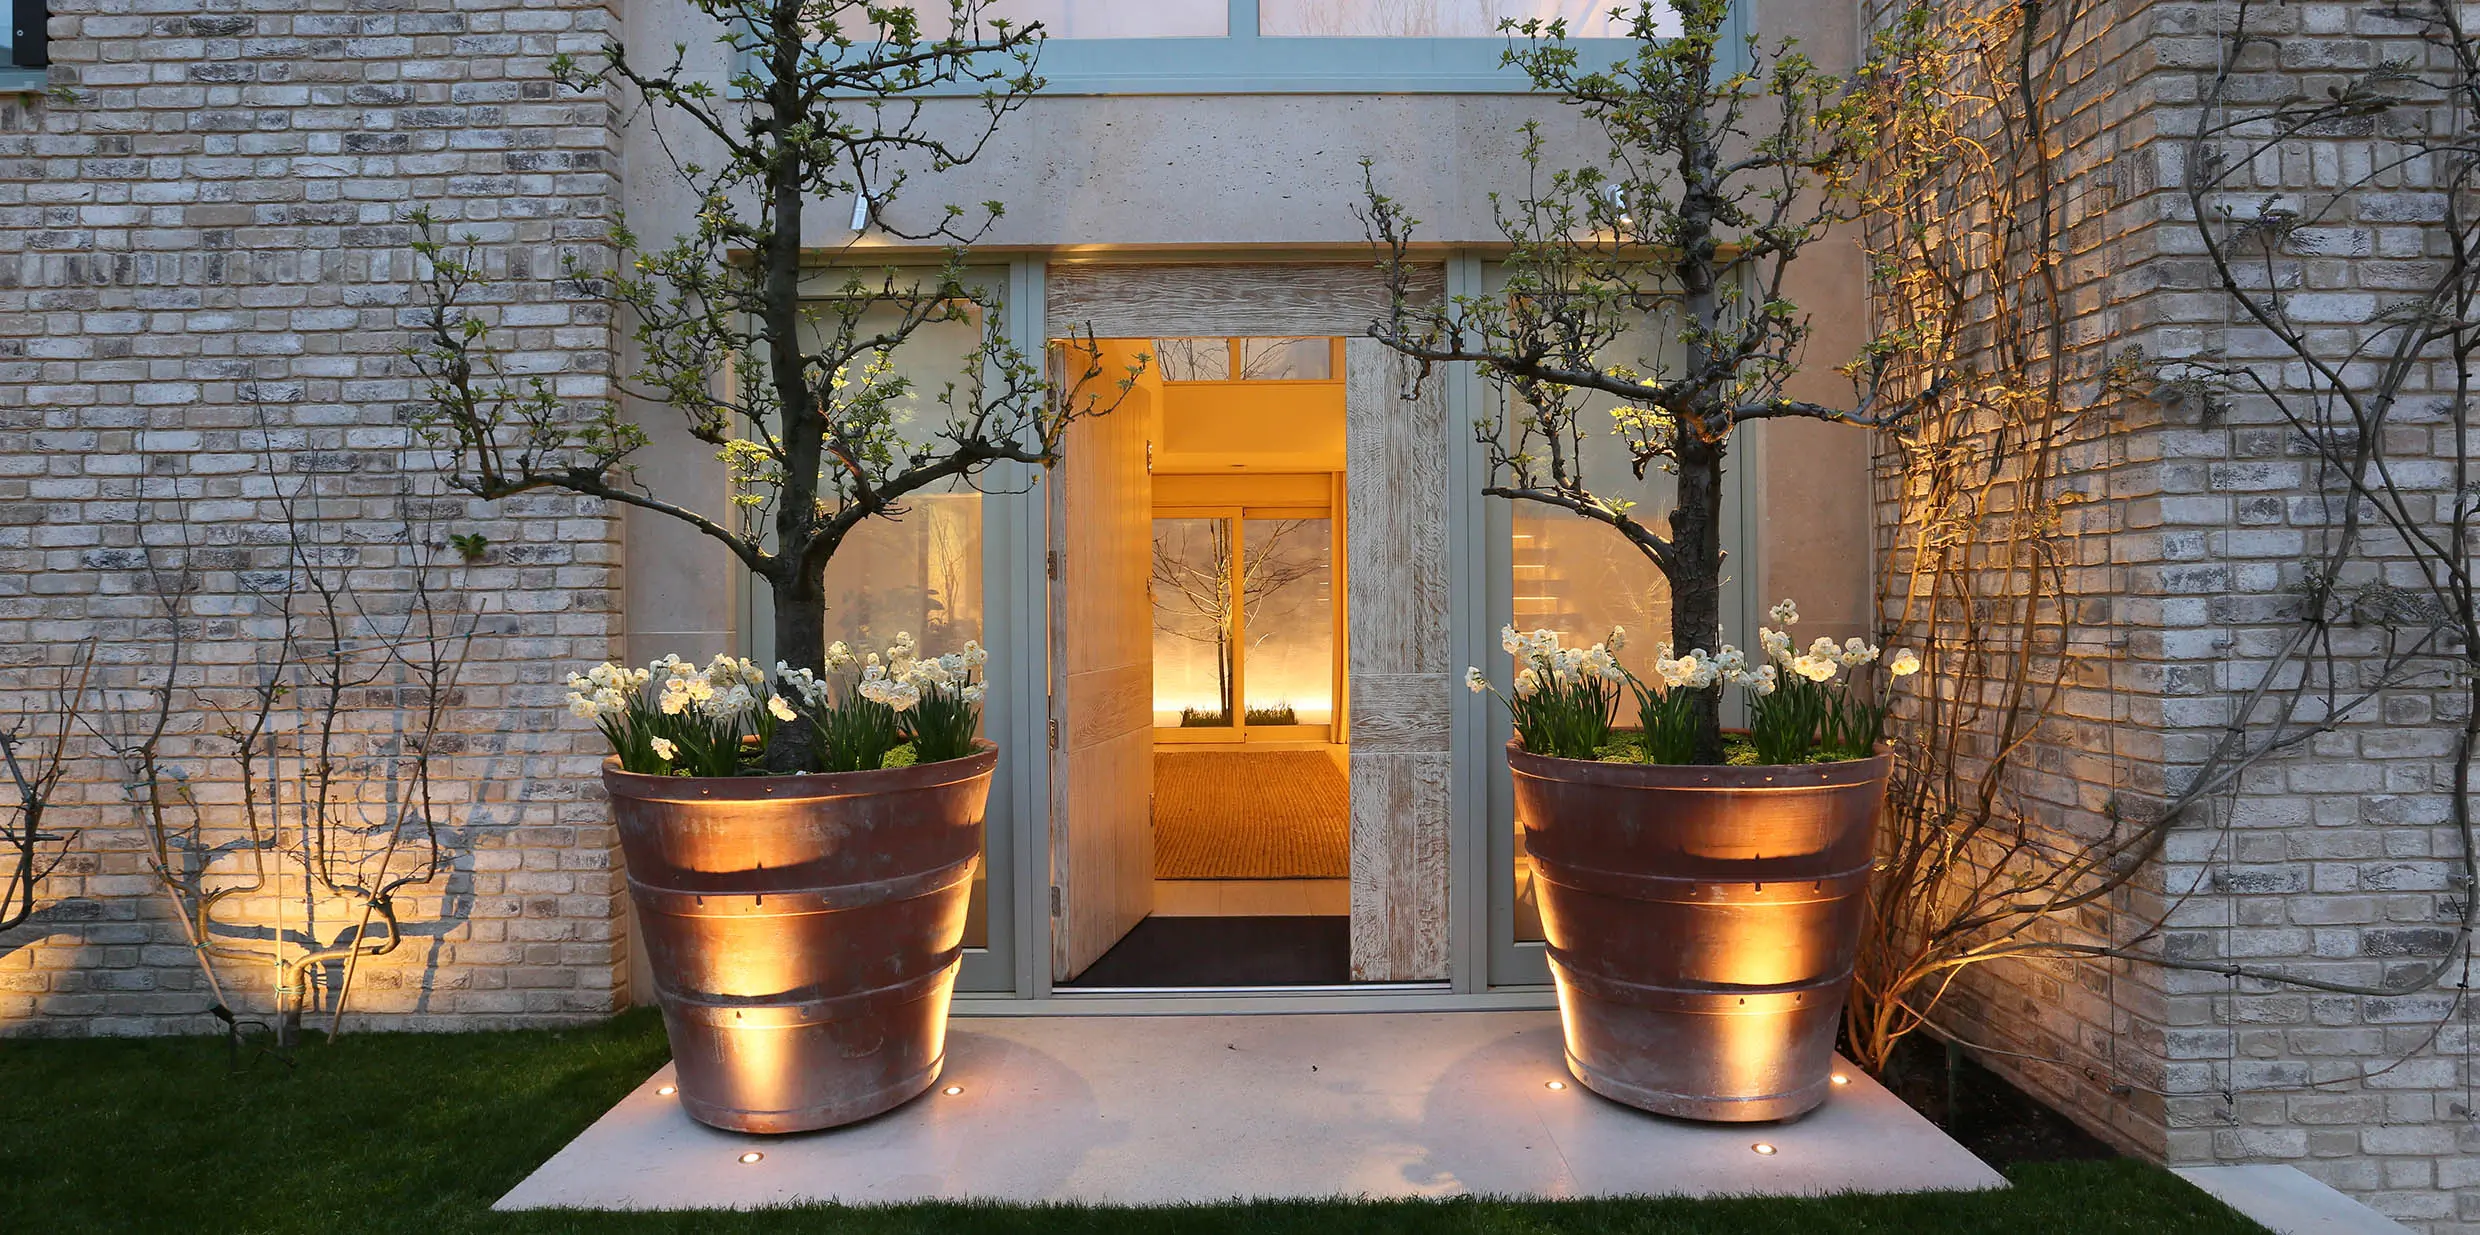 over sized pots with planting and uplights frame a contemporary front door with